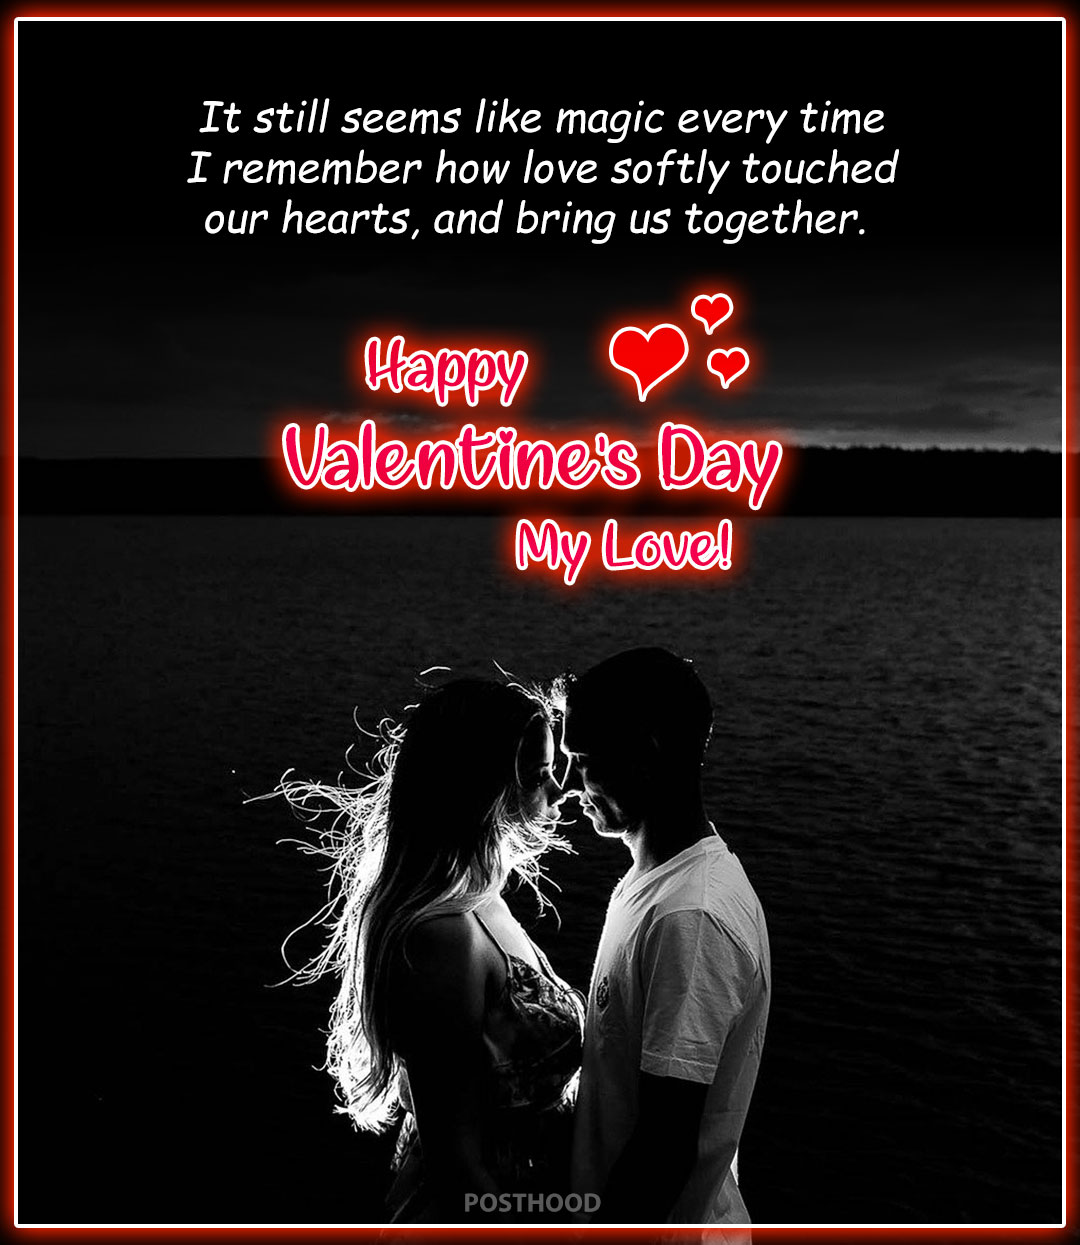 I love you text message for your lover. Find 50 more cute and heartwarming valentine's day love messages for her or him. 